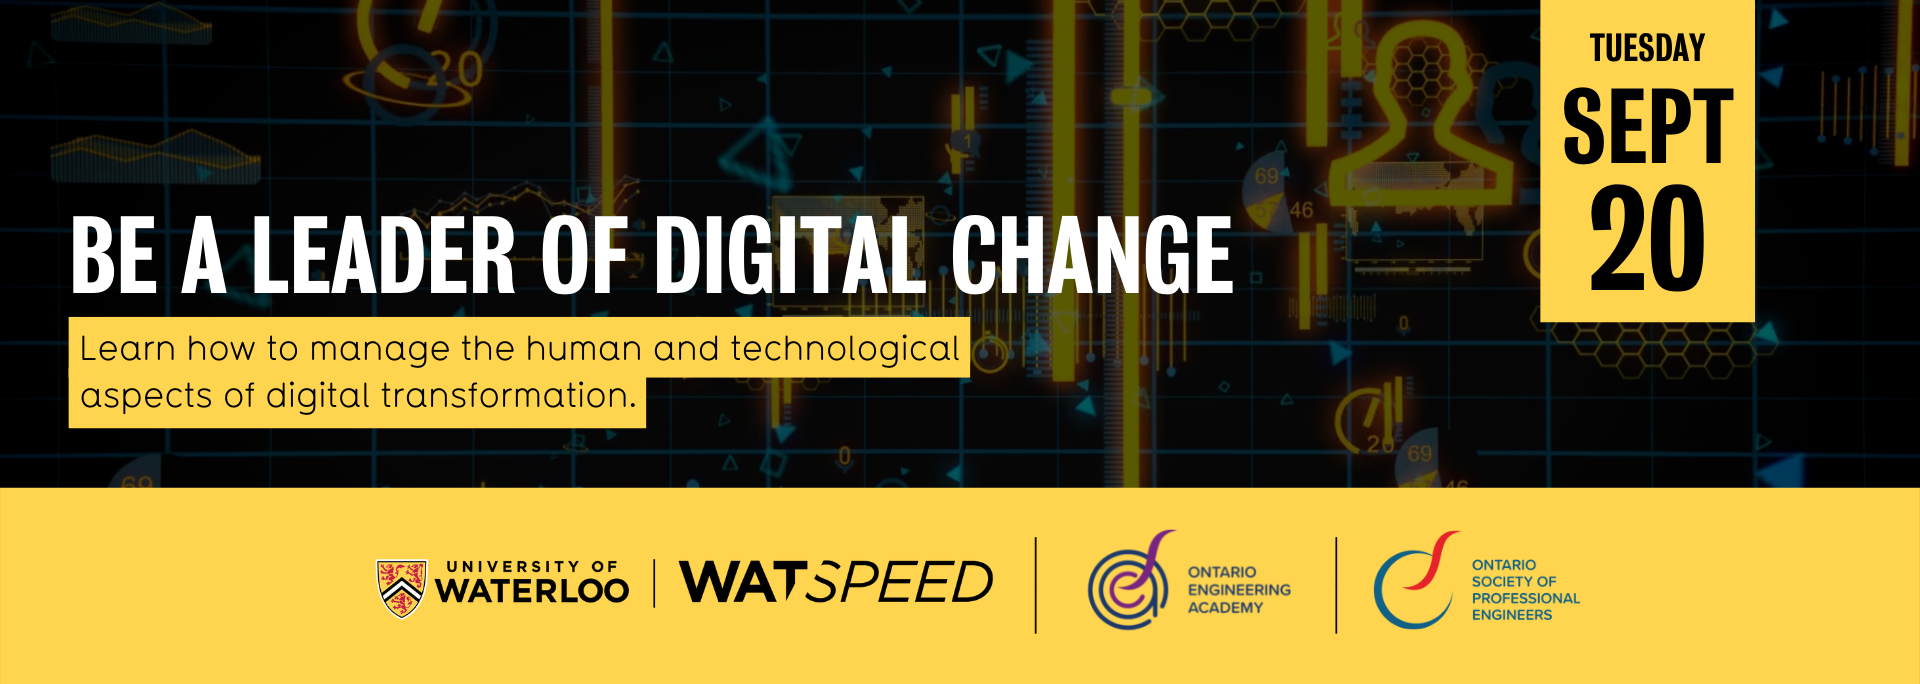 BE A LEADER OF DIGITAL CHANGE
Learn how to manage the human and technological aspects of digital transformation.